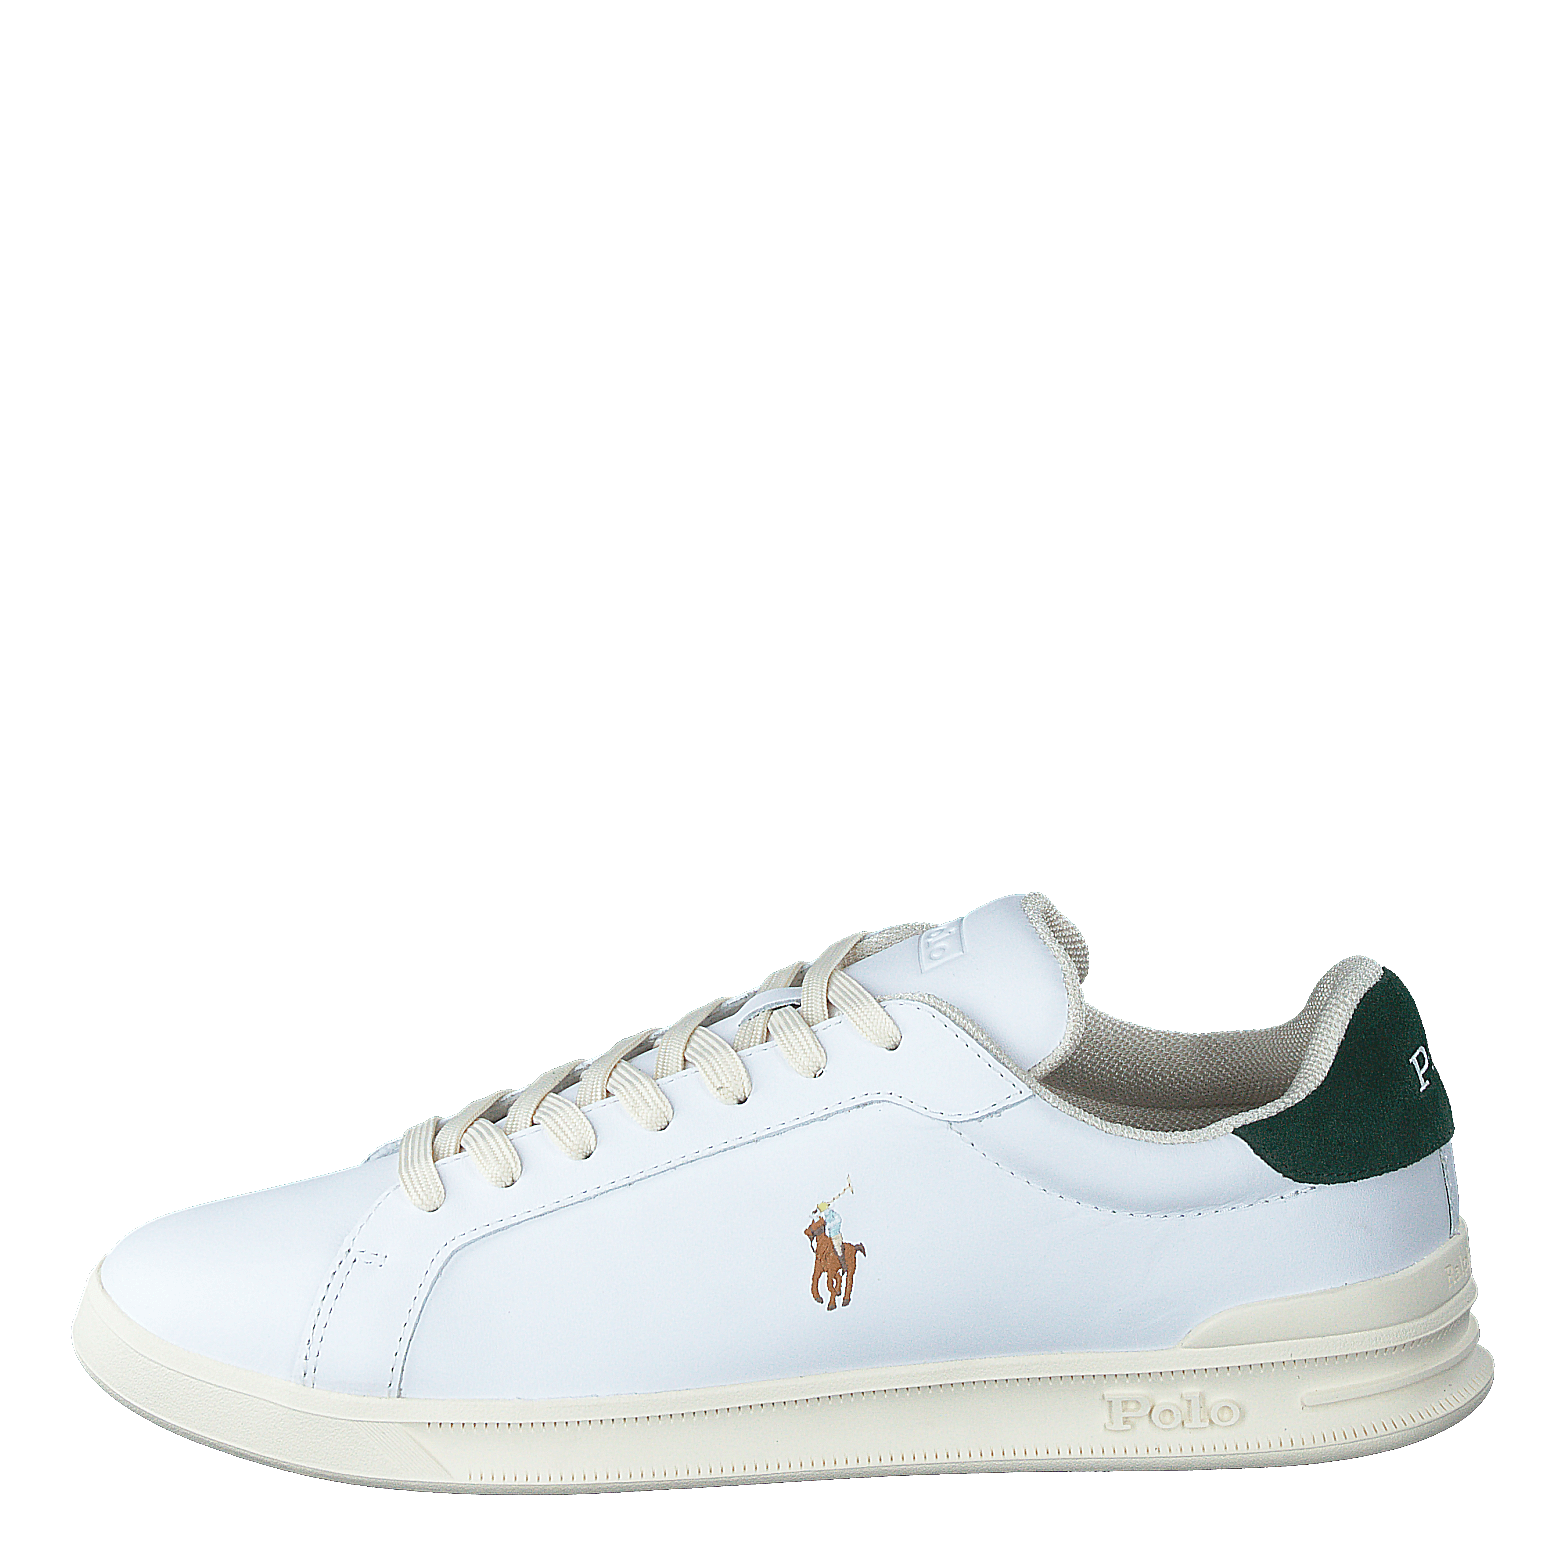 Heritage Court II Leather Sneaker White / College Green